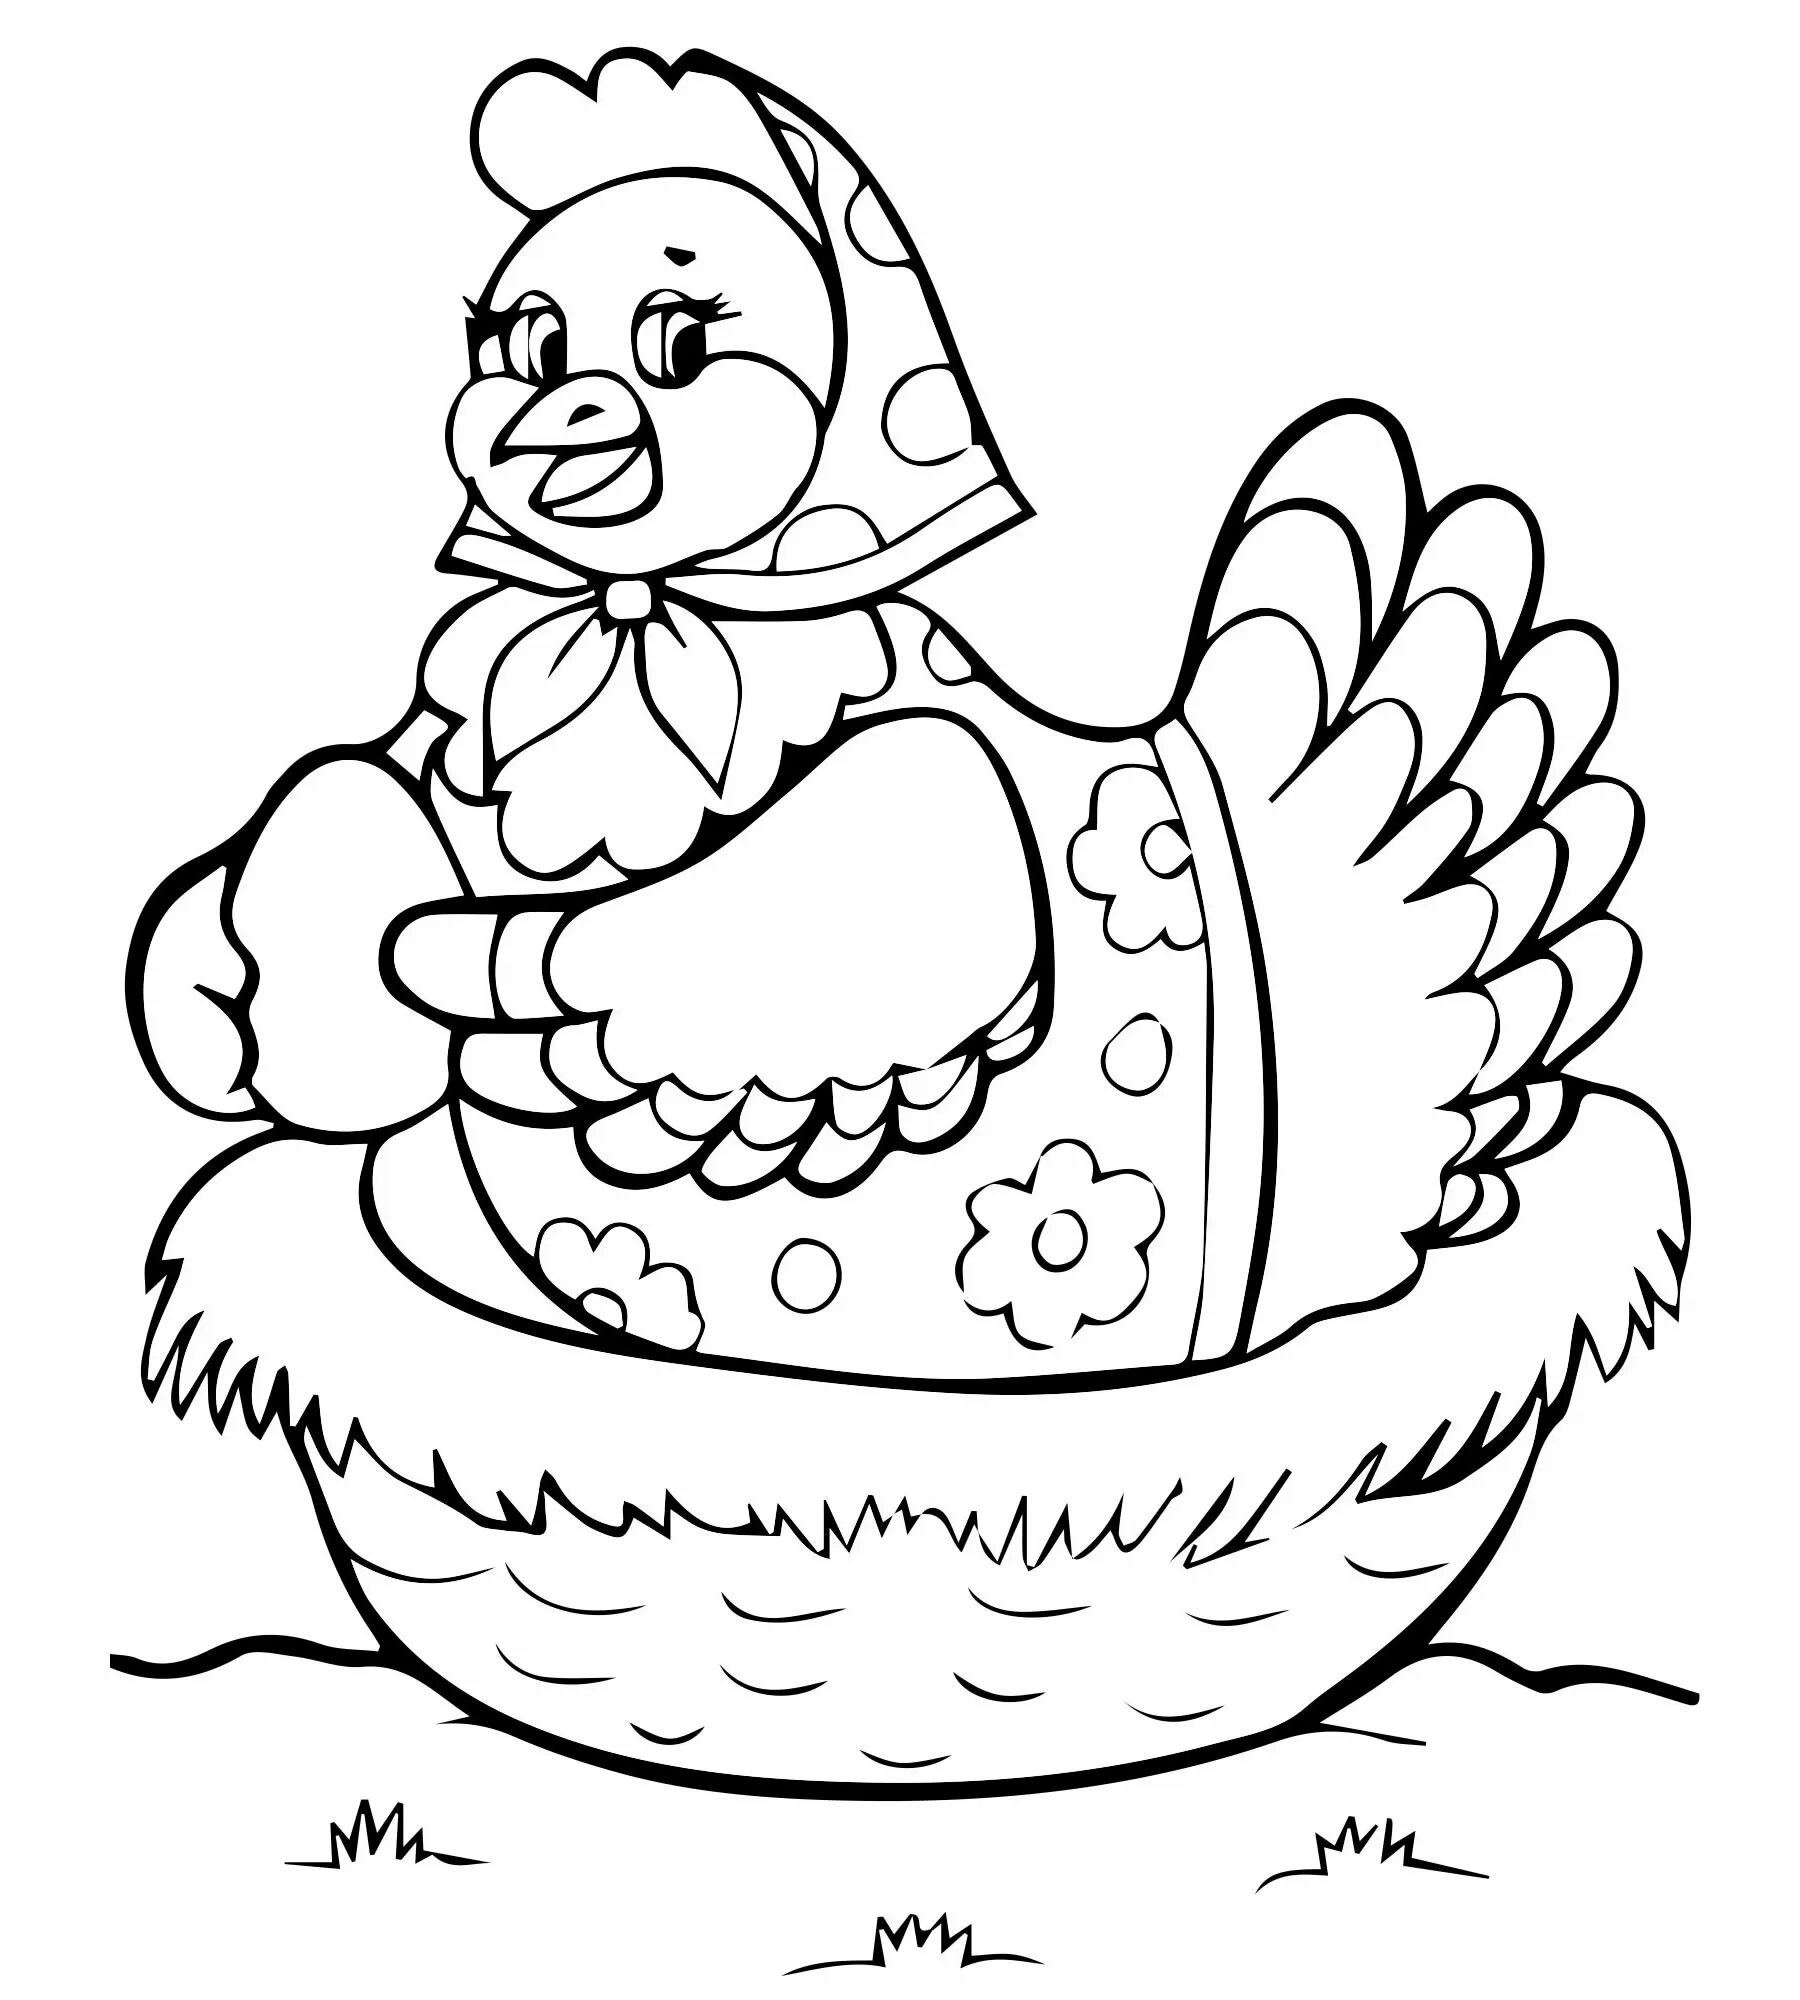 Gorgeous Ryaba chicken coloring book for kids